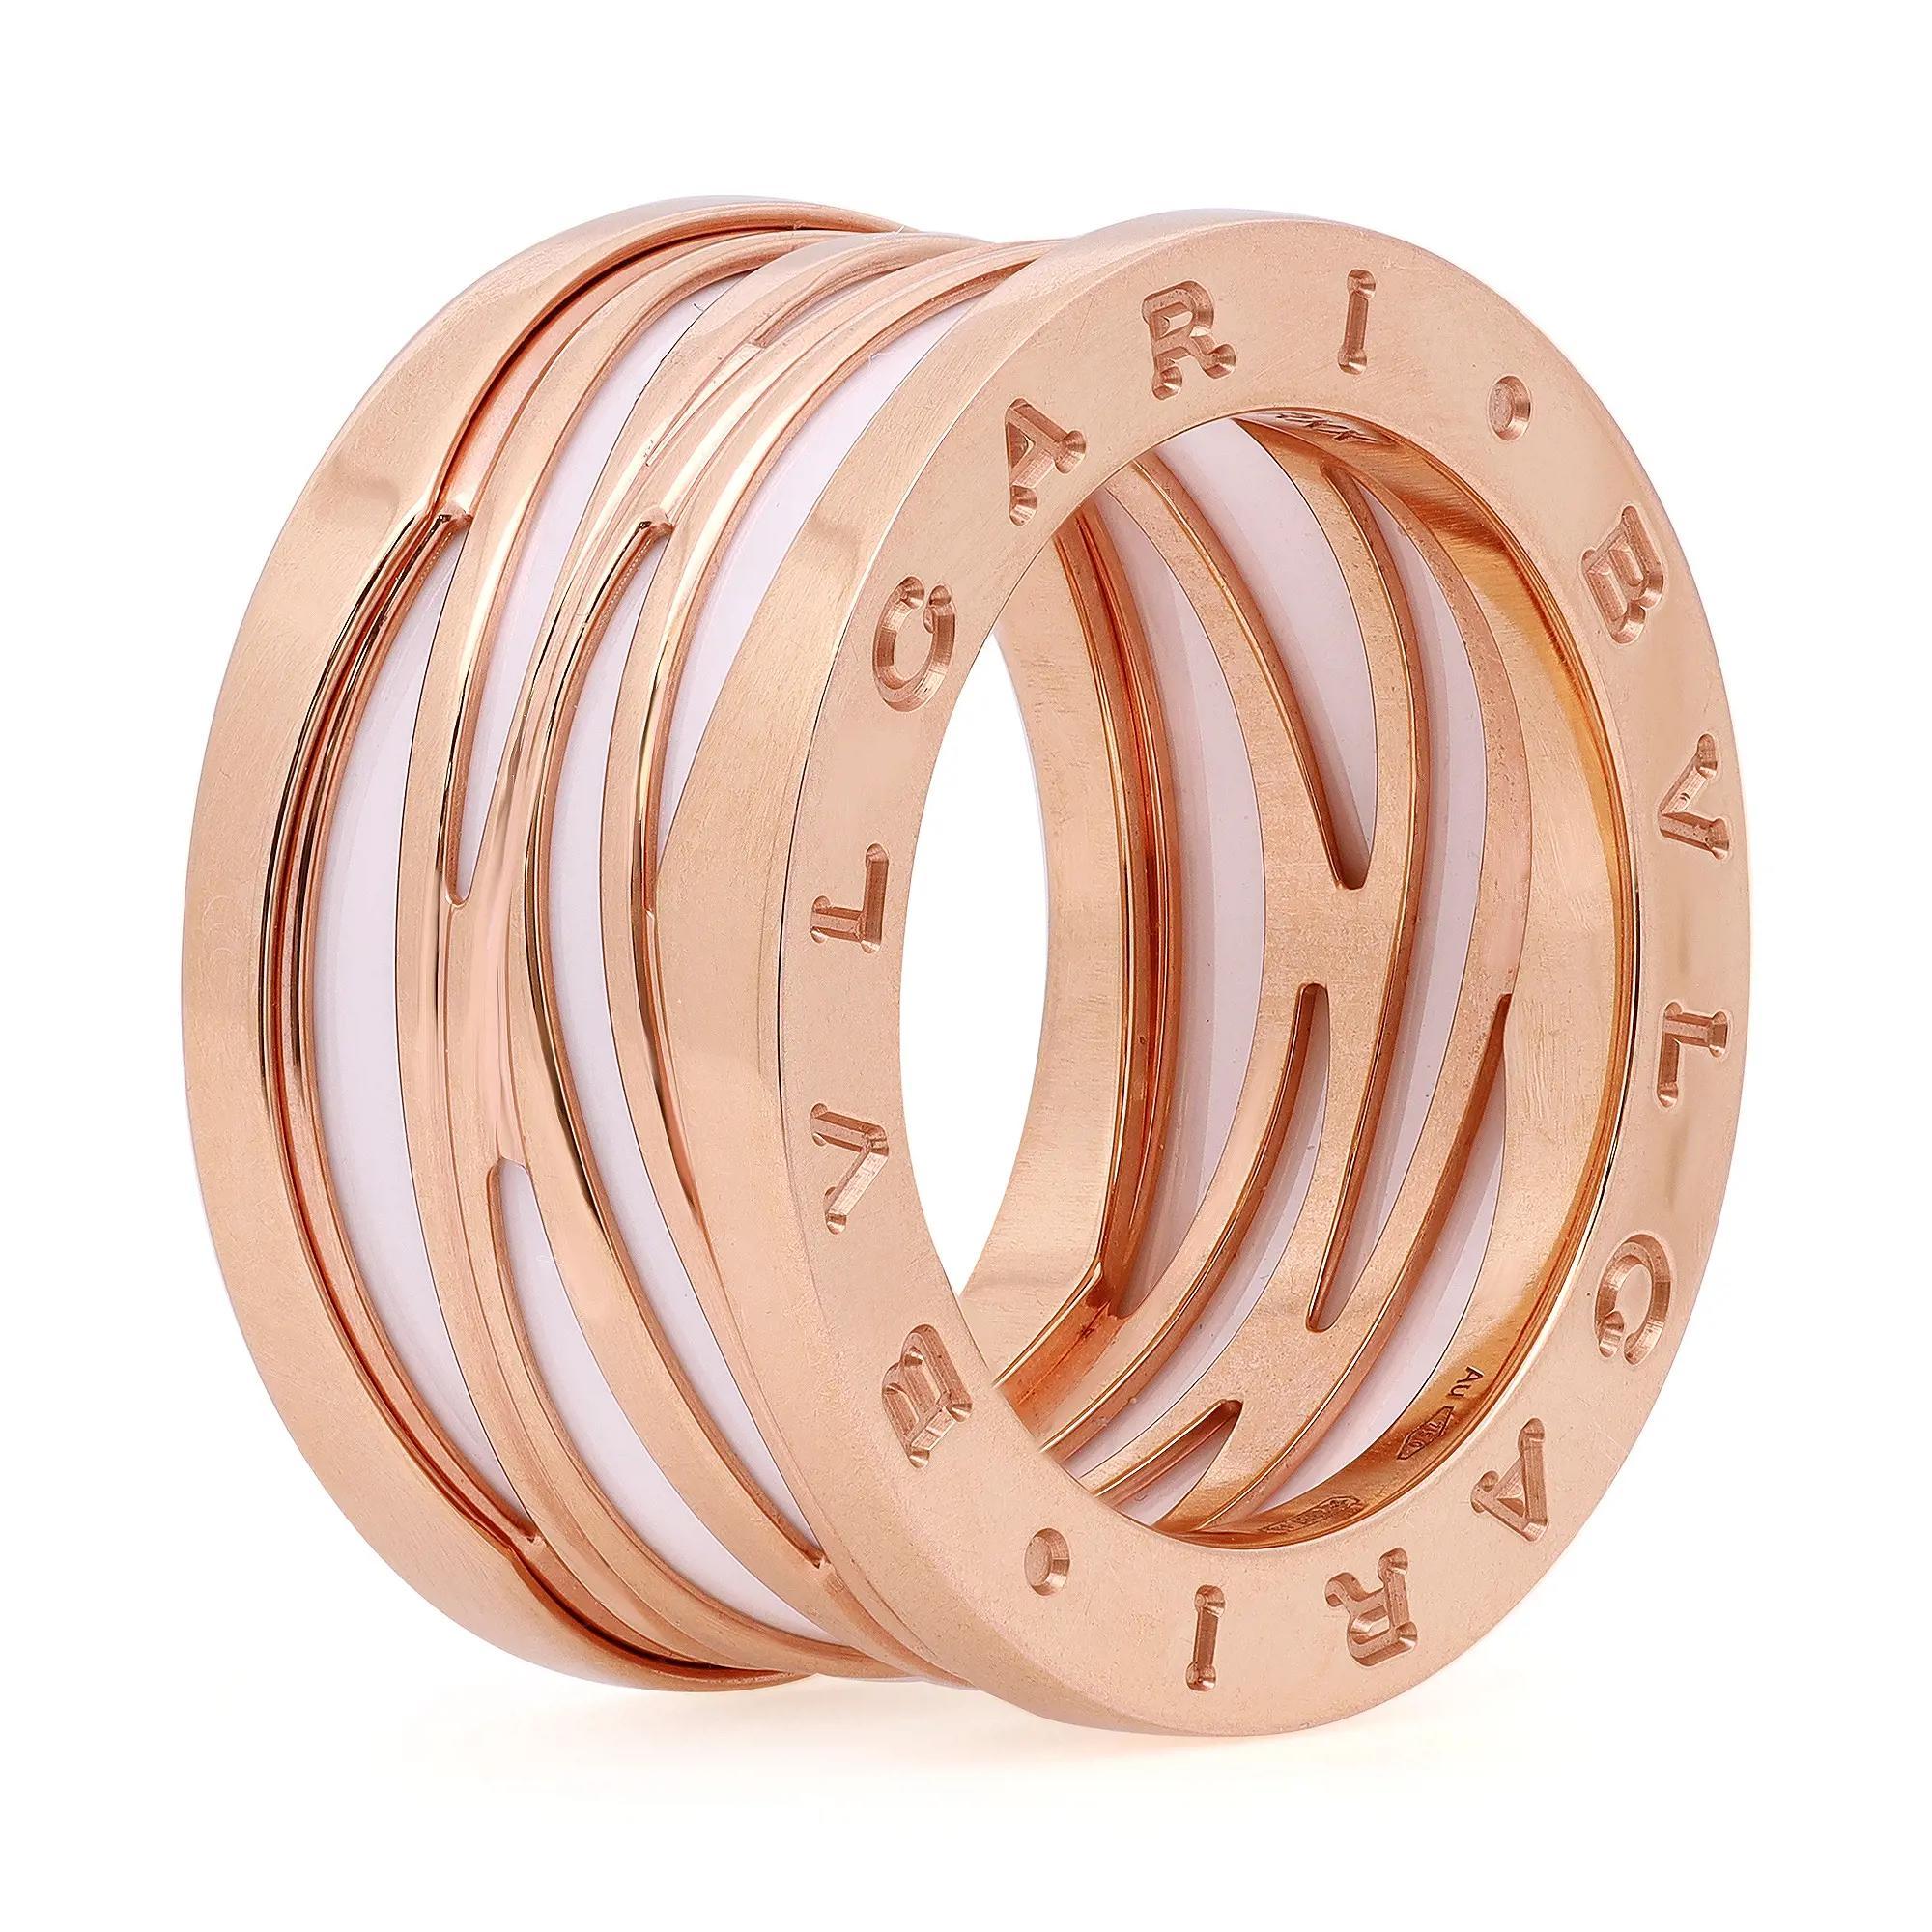 B.zero1 Design Legend jewelry is a perfect collision of modernity and tradition. Crafted in fine 18K rose gold. It features a clean modern four band ring inlaid with white ceramic and engraved with BVLGARI logo on both sides. This ring makes a great